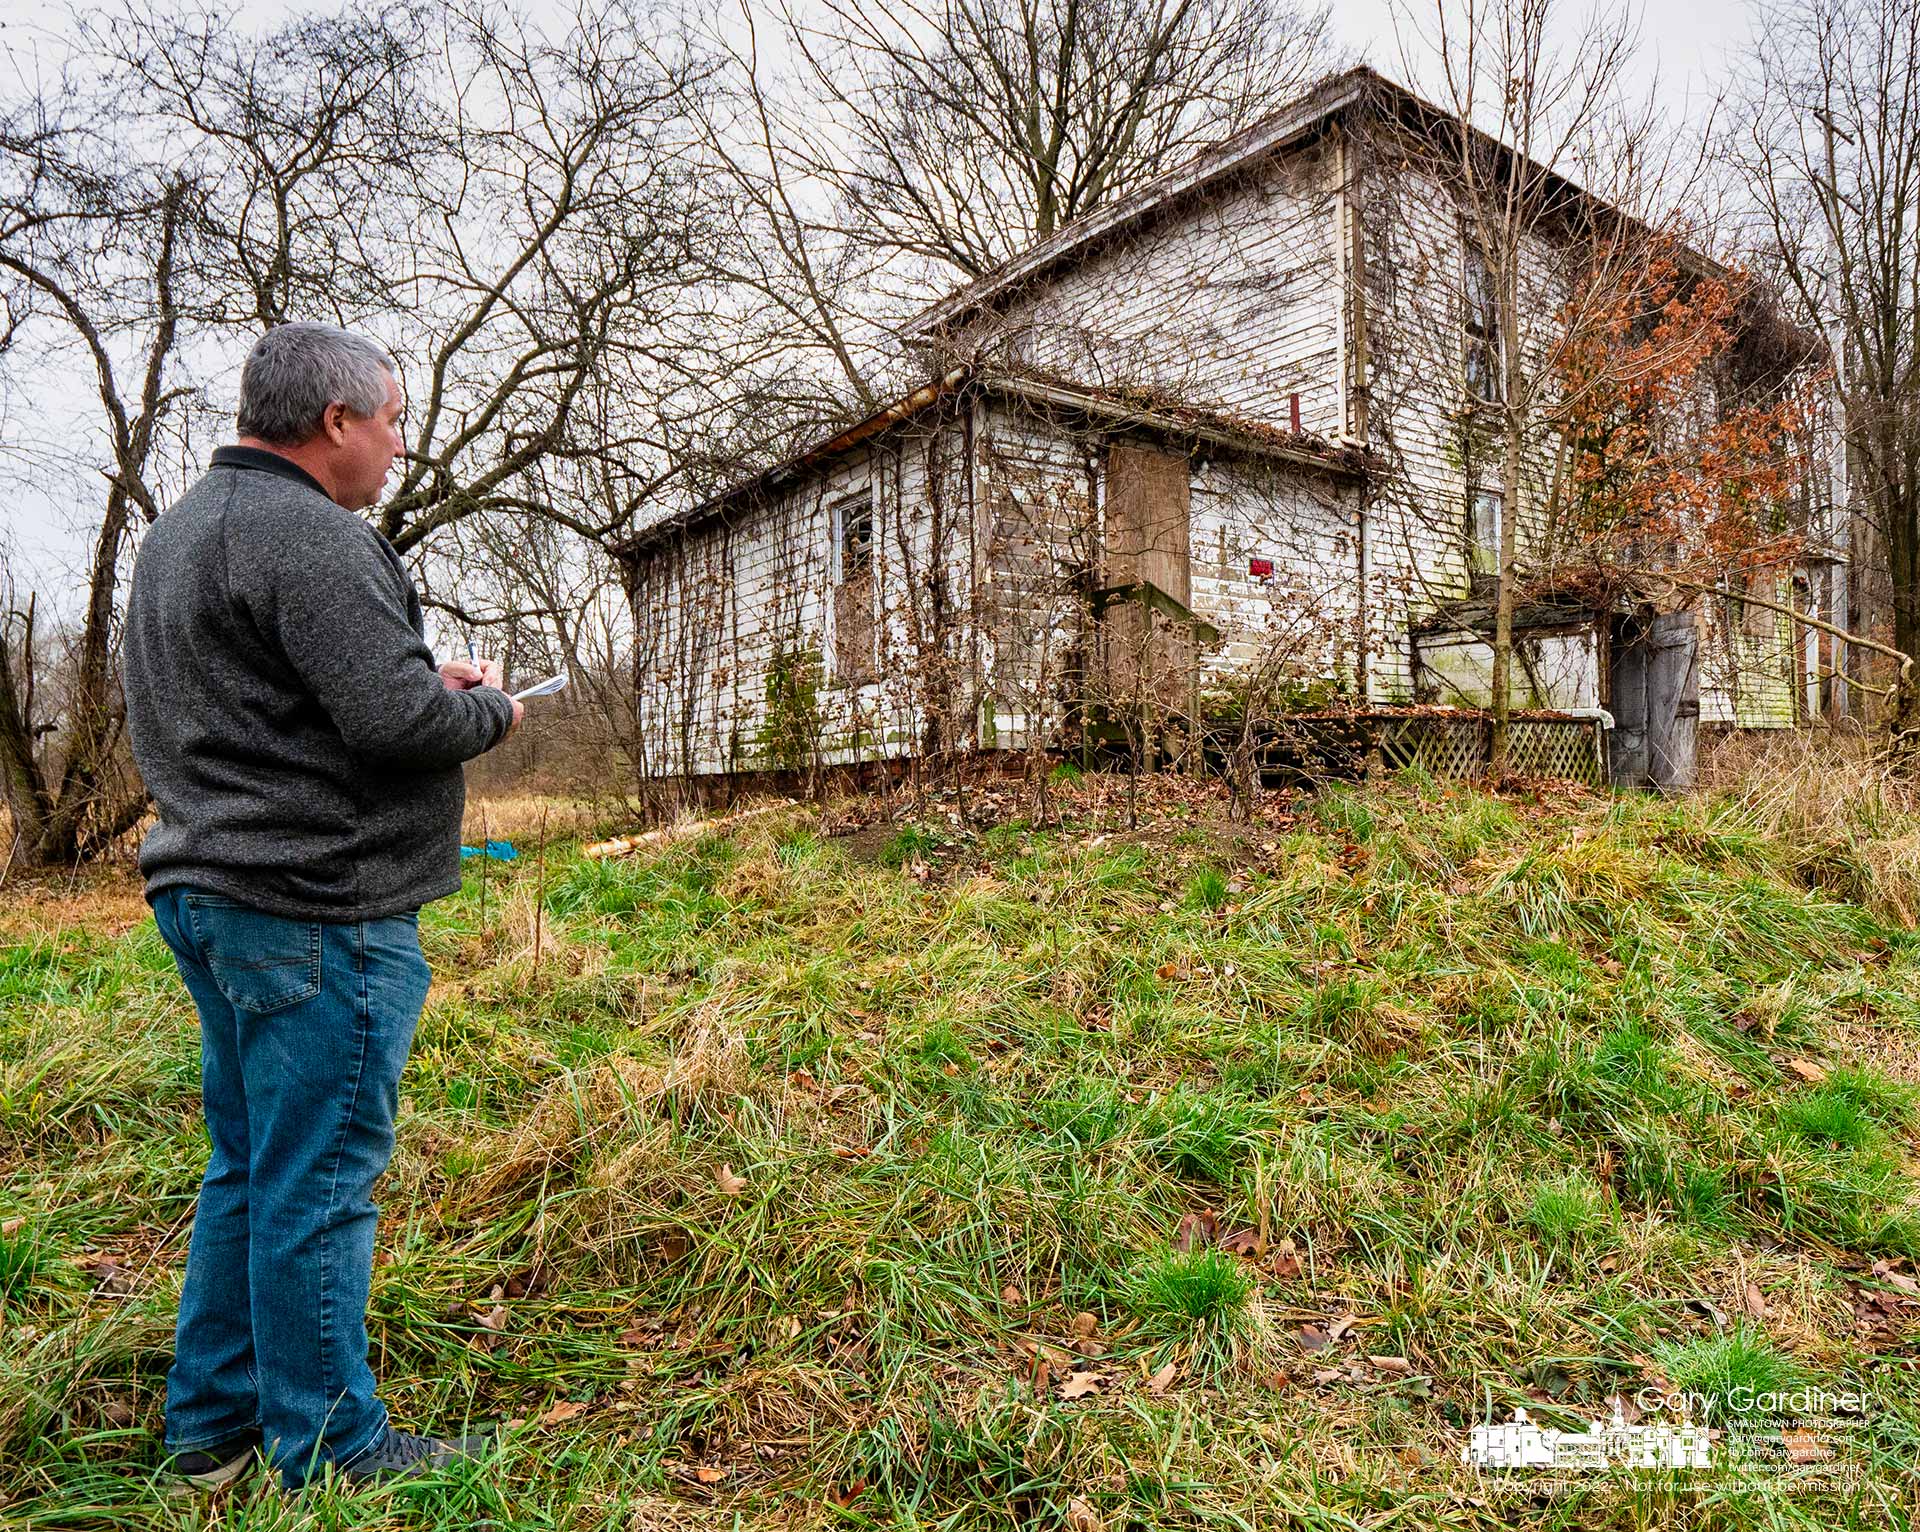 A demolition company worker figures how many truckloads of material will be hauled away when the farmhouse at the Braun Farm is demolished as the new owner plans to develop the property. My Final Photo for November 28, 2022.